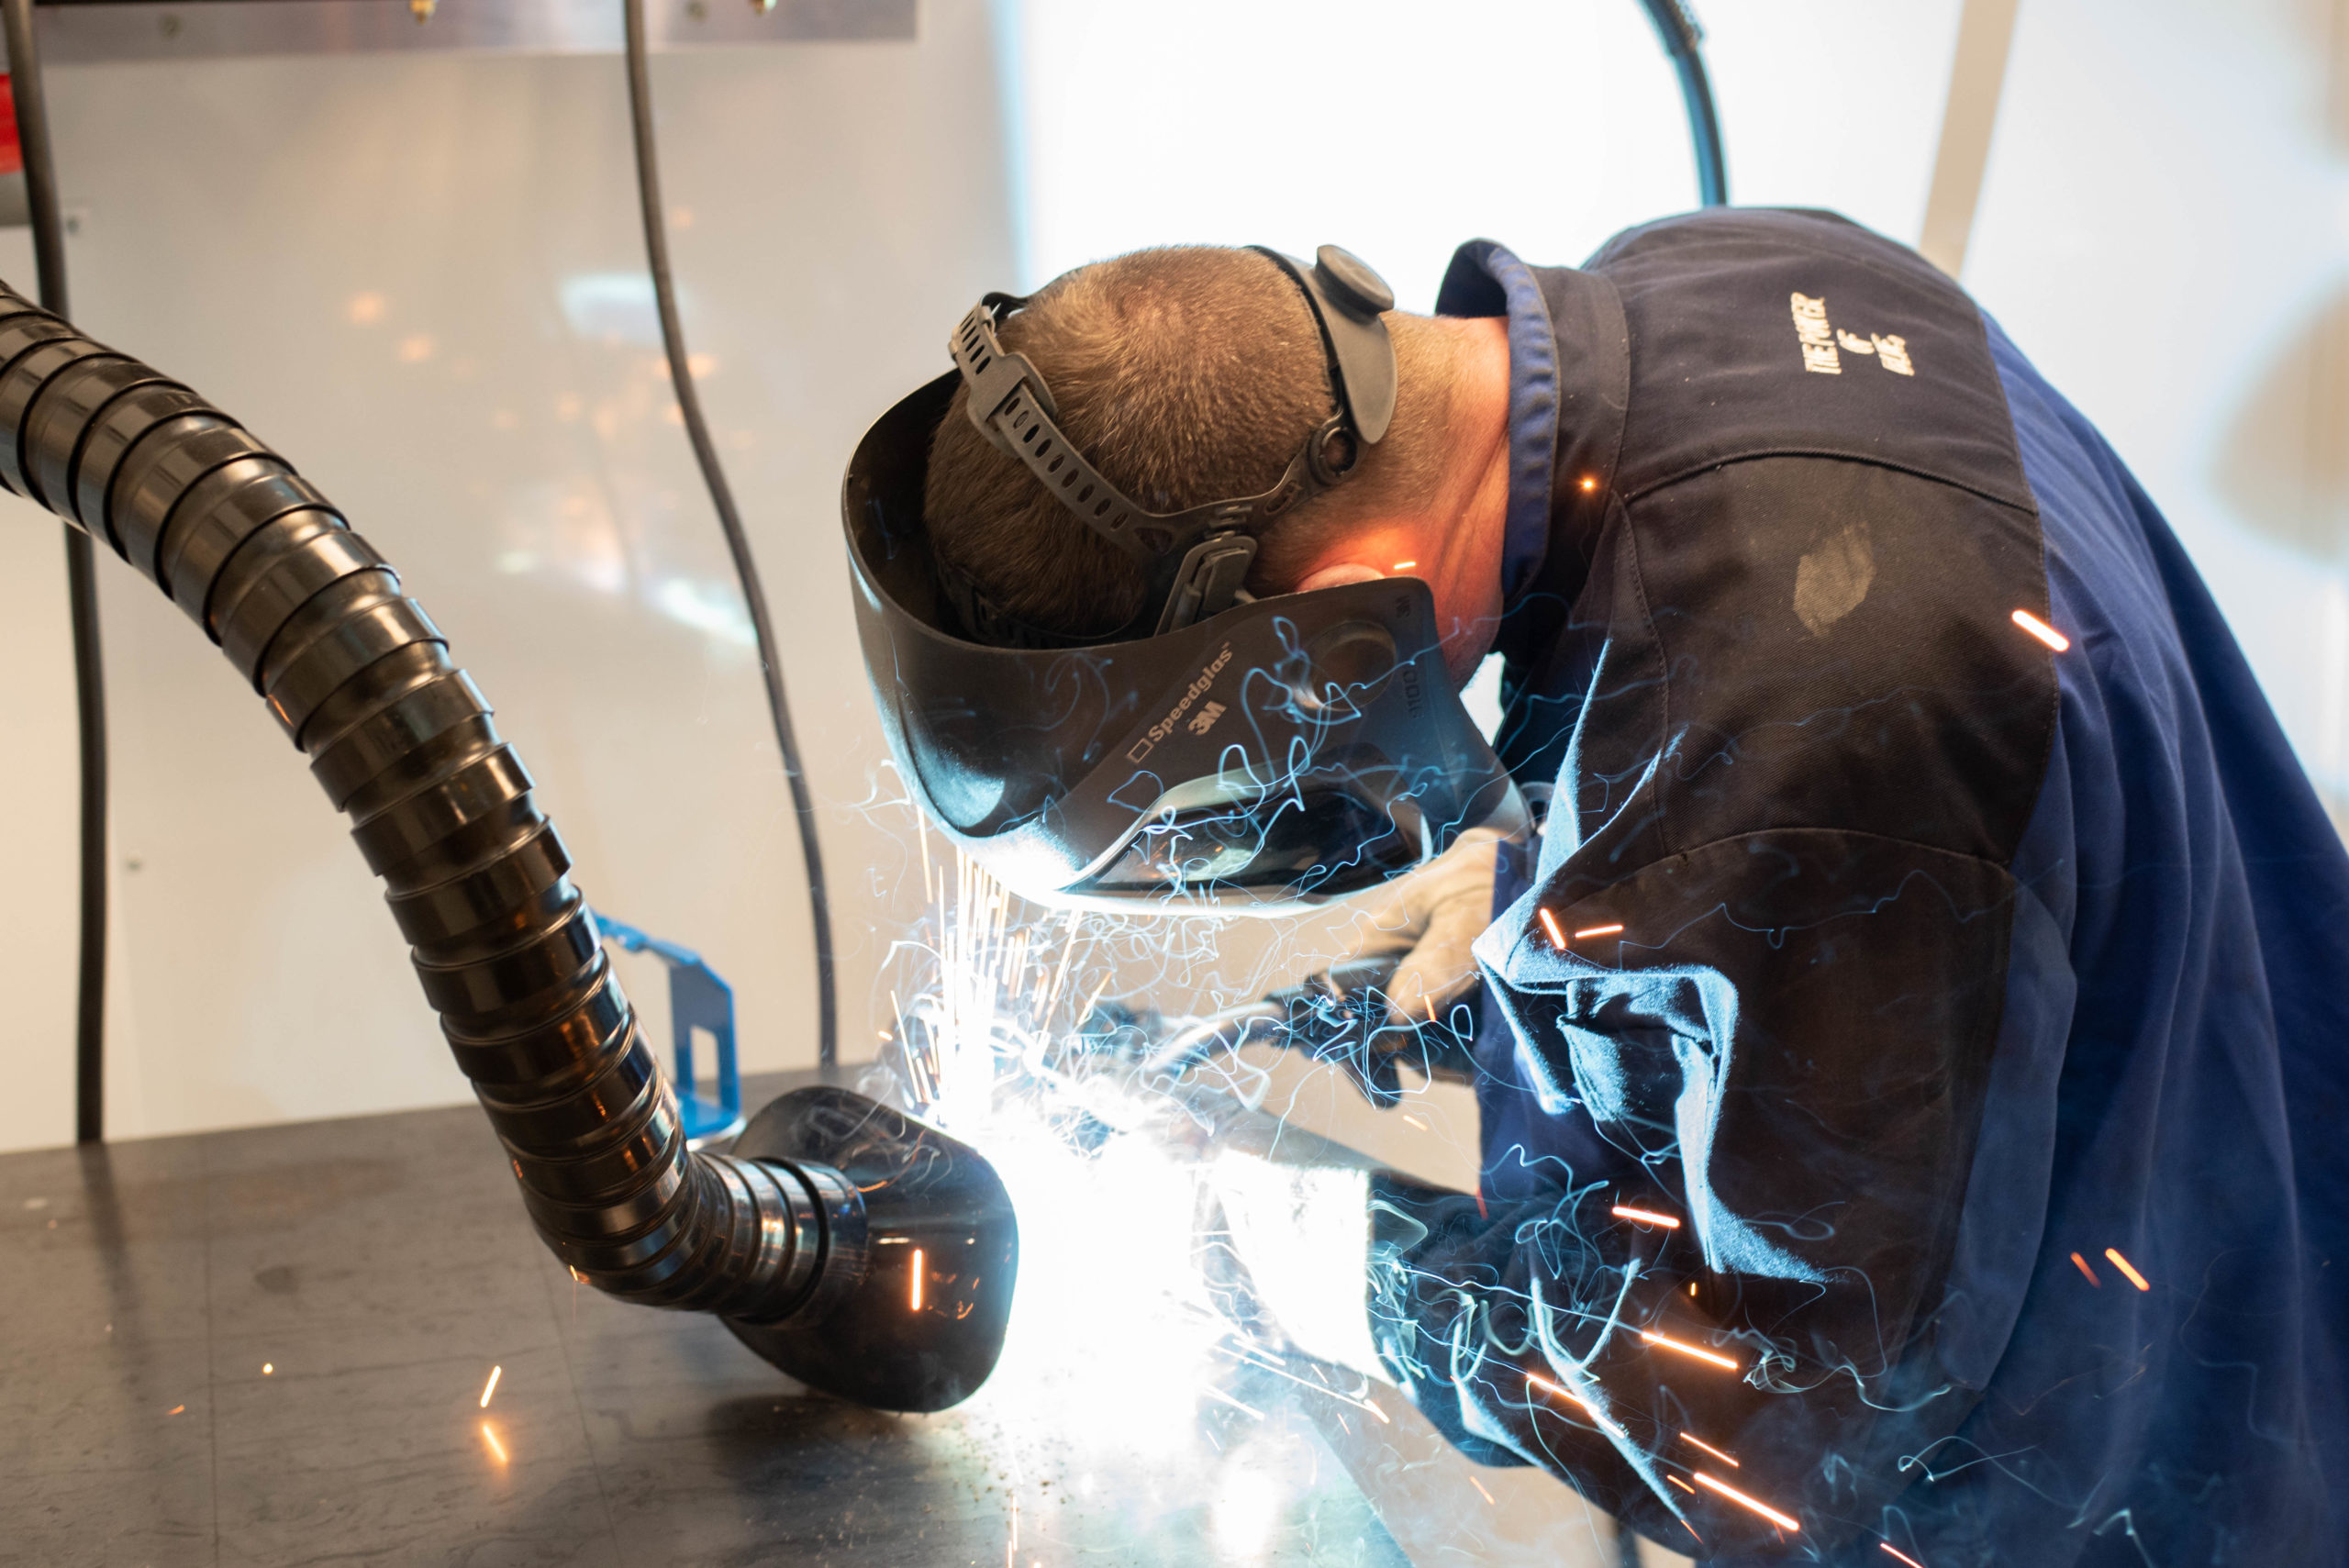 A man welding in First Institute mobile welding lab